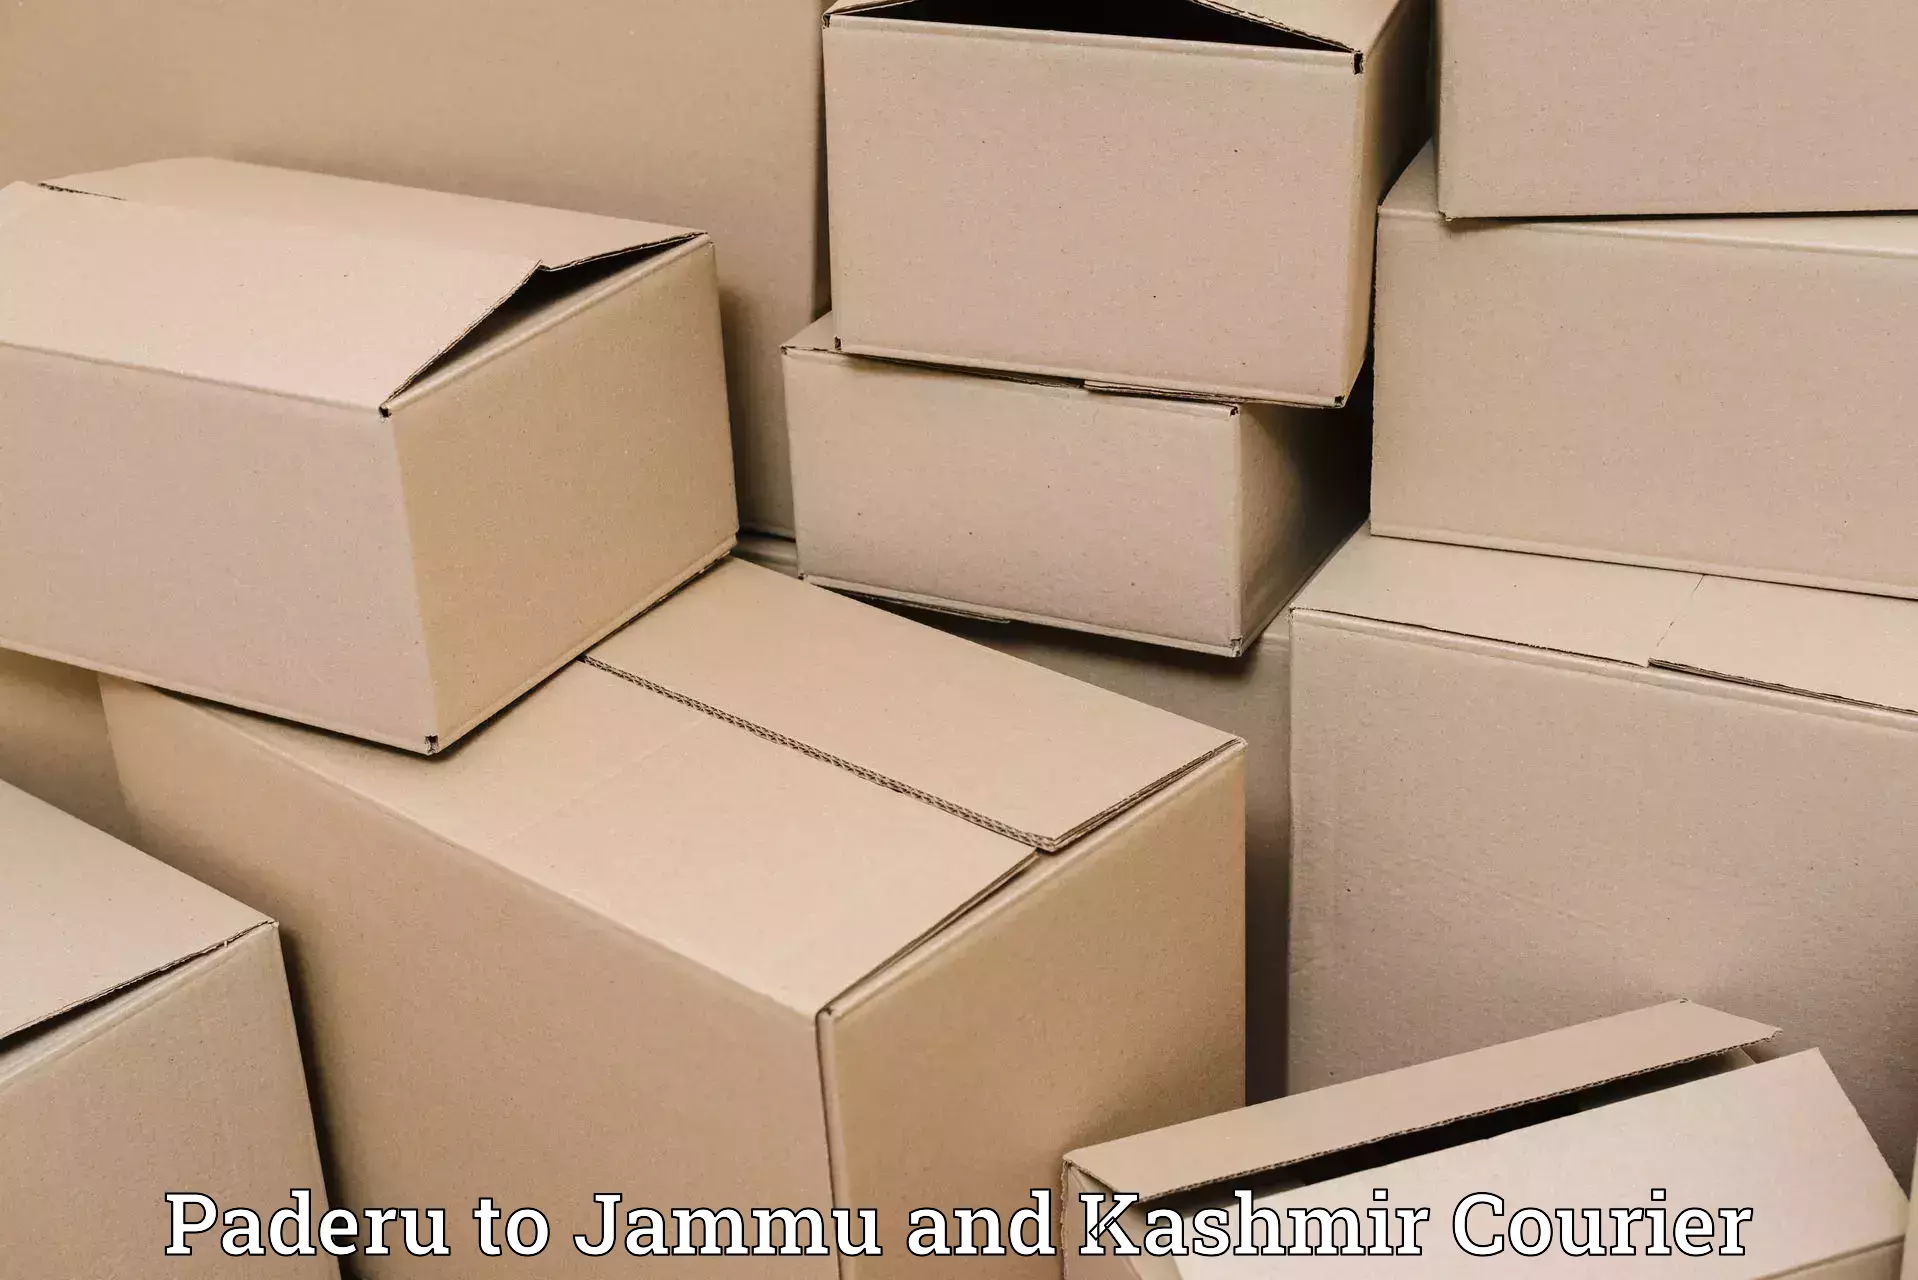 24-hour delivery options Paderu to Jammu and Kashmir